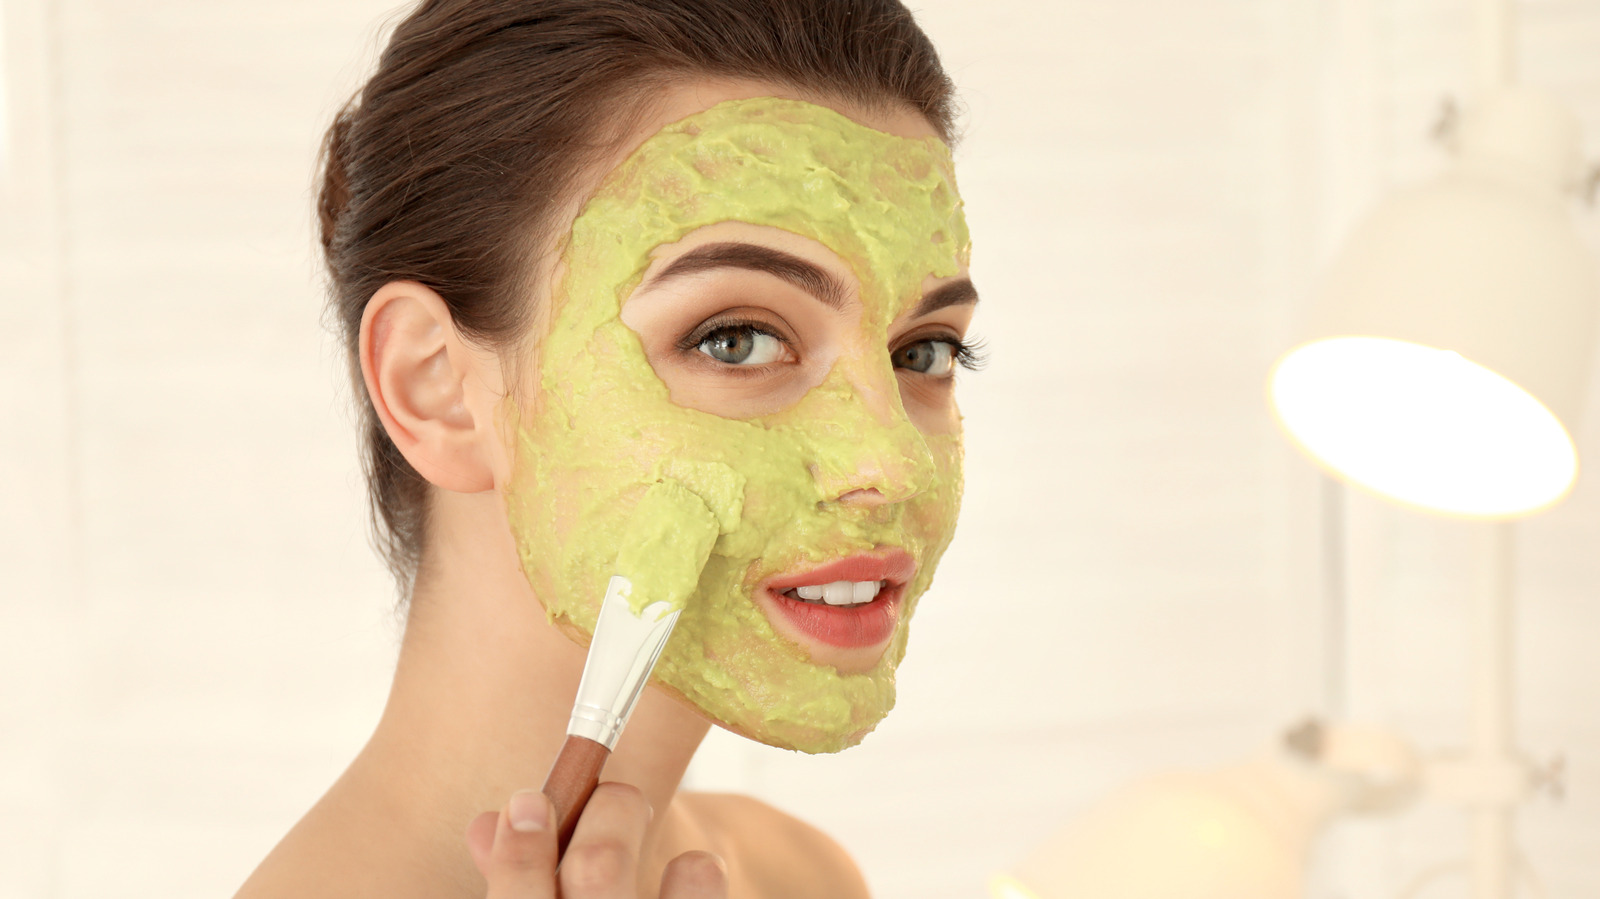 15 DIY Face Mask Ideas For Your Next Self-Care photo